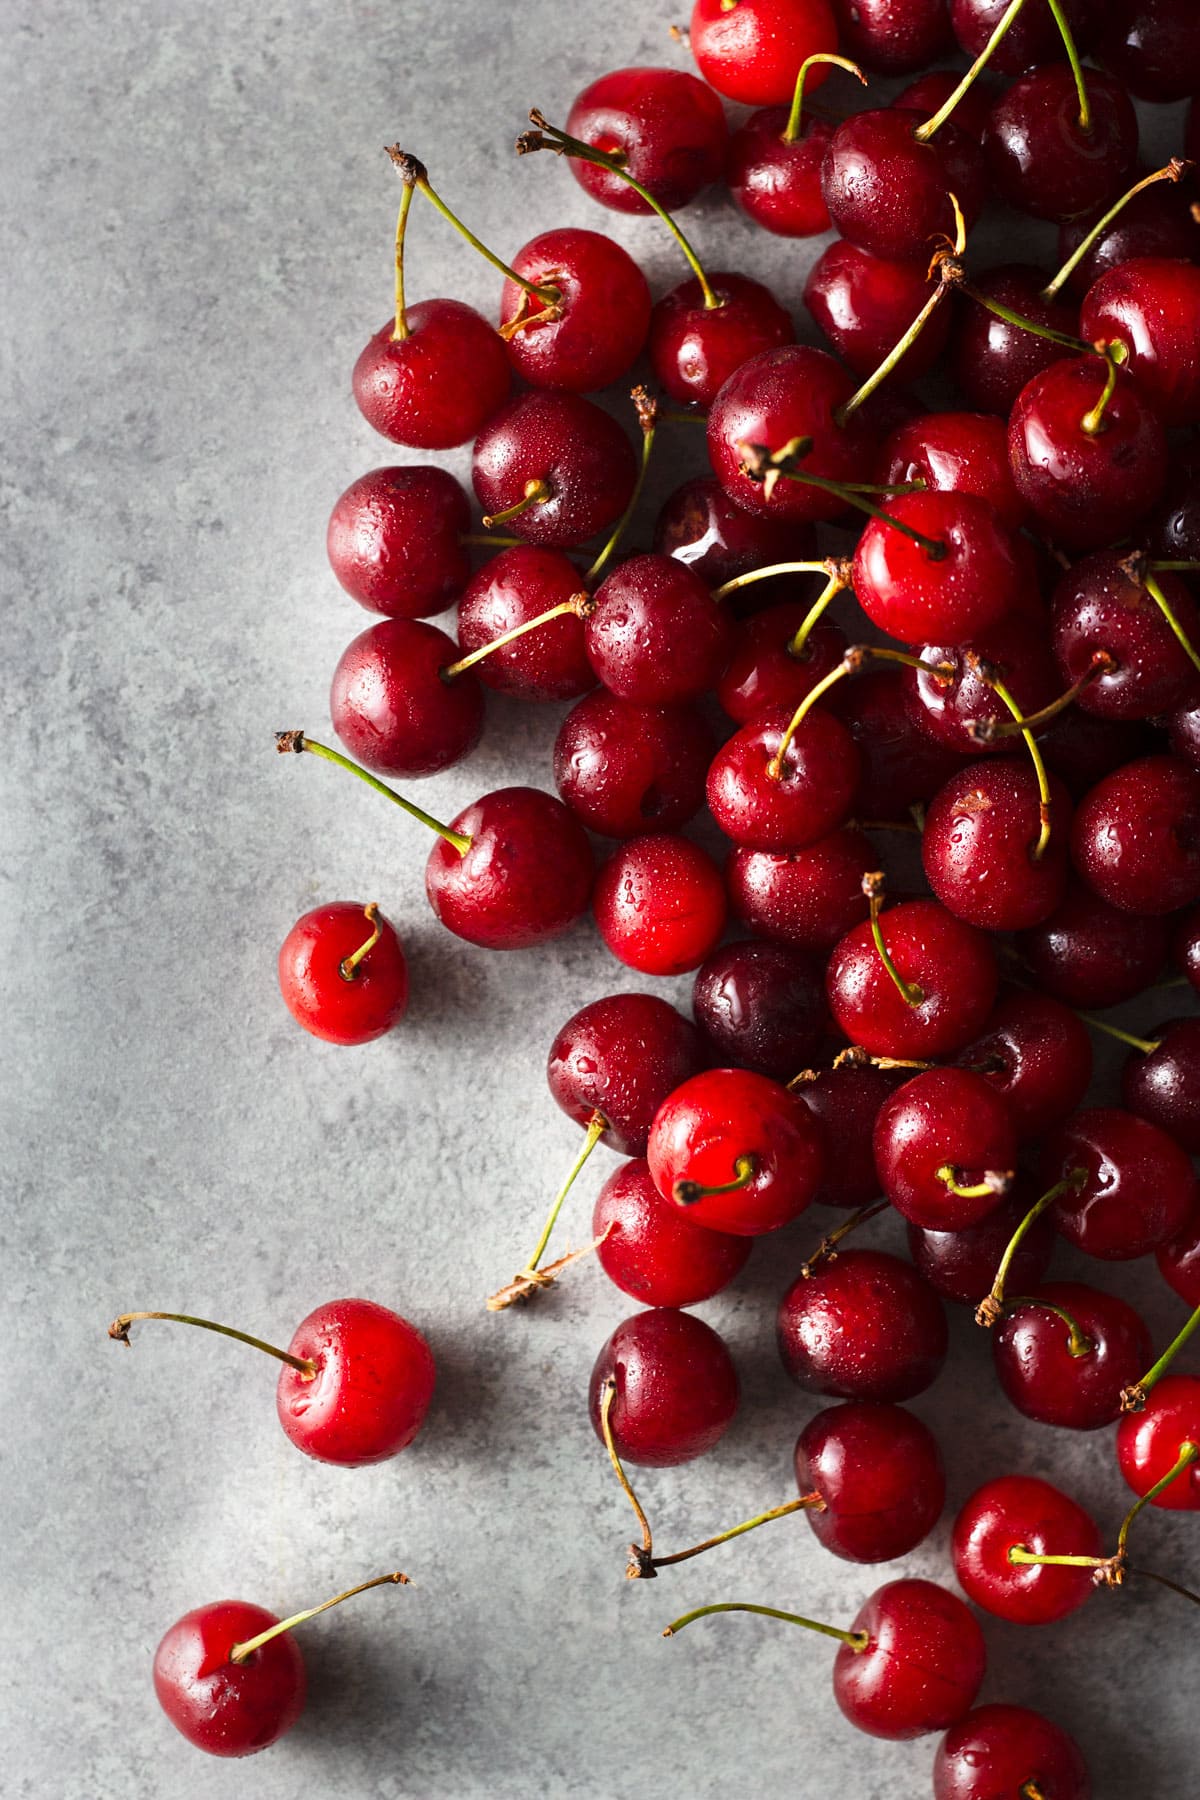 Overhead view of a group of sour cherries on a light grey surface.